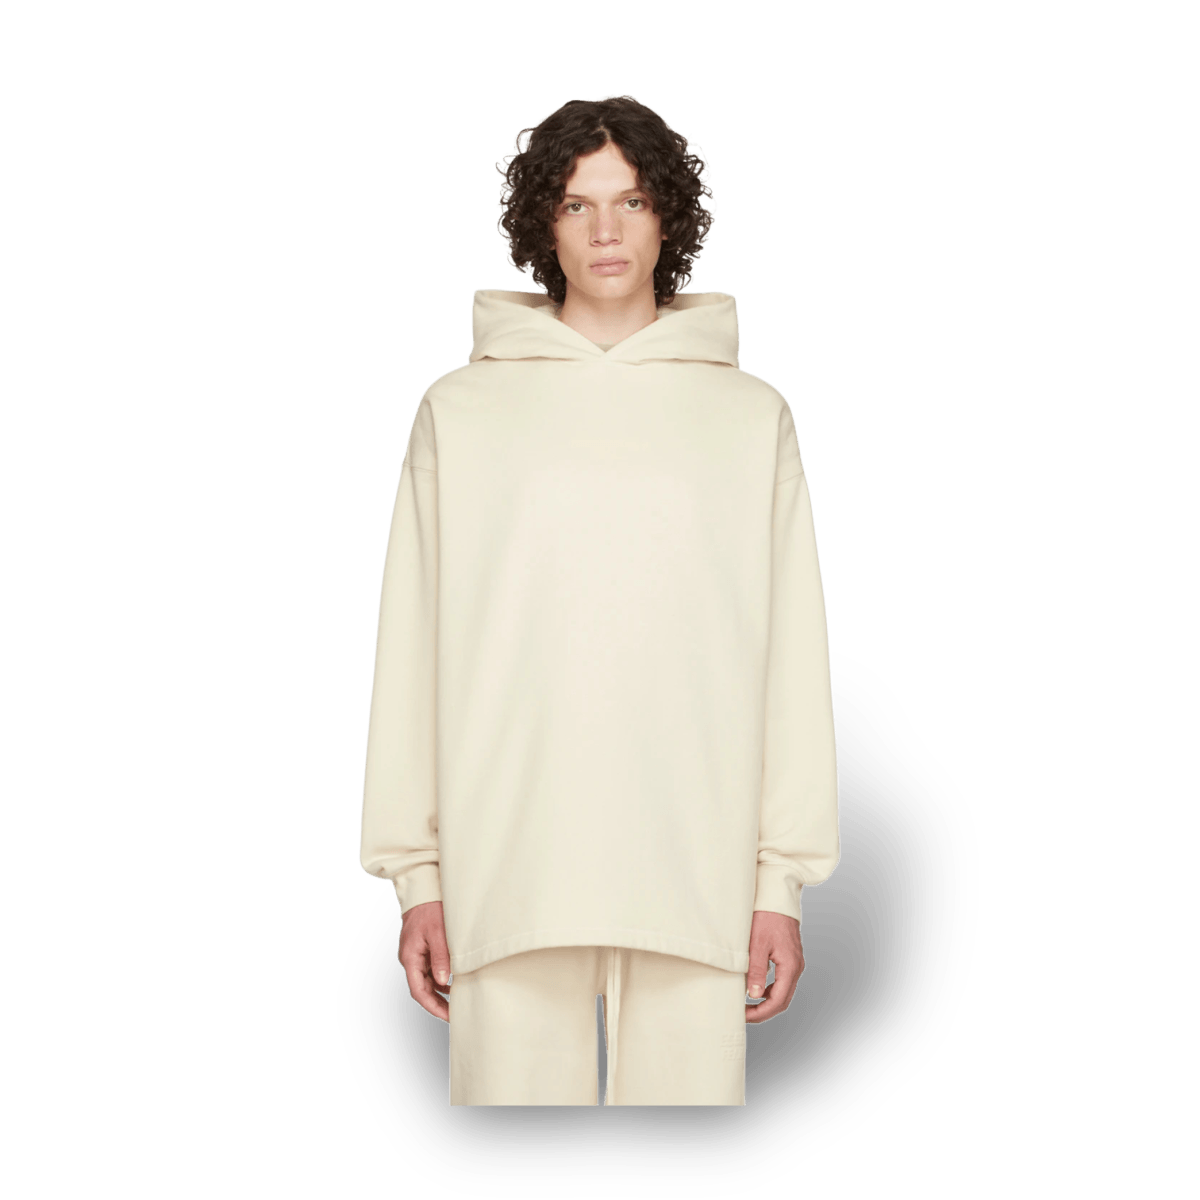 Essentials Fear of God Cream Hoodie Relaxed Fit - Hoodie - Essentials - Jawns on Fire